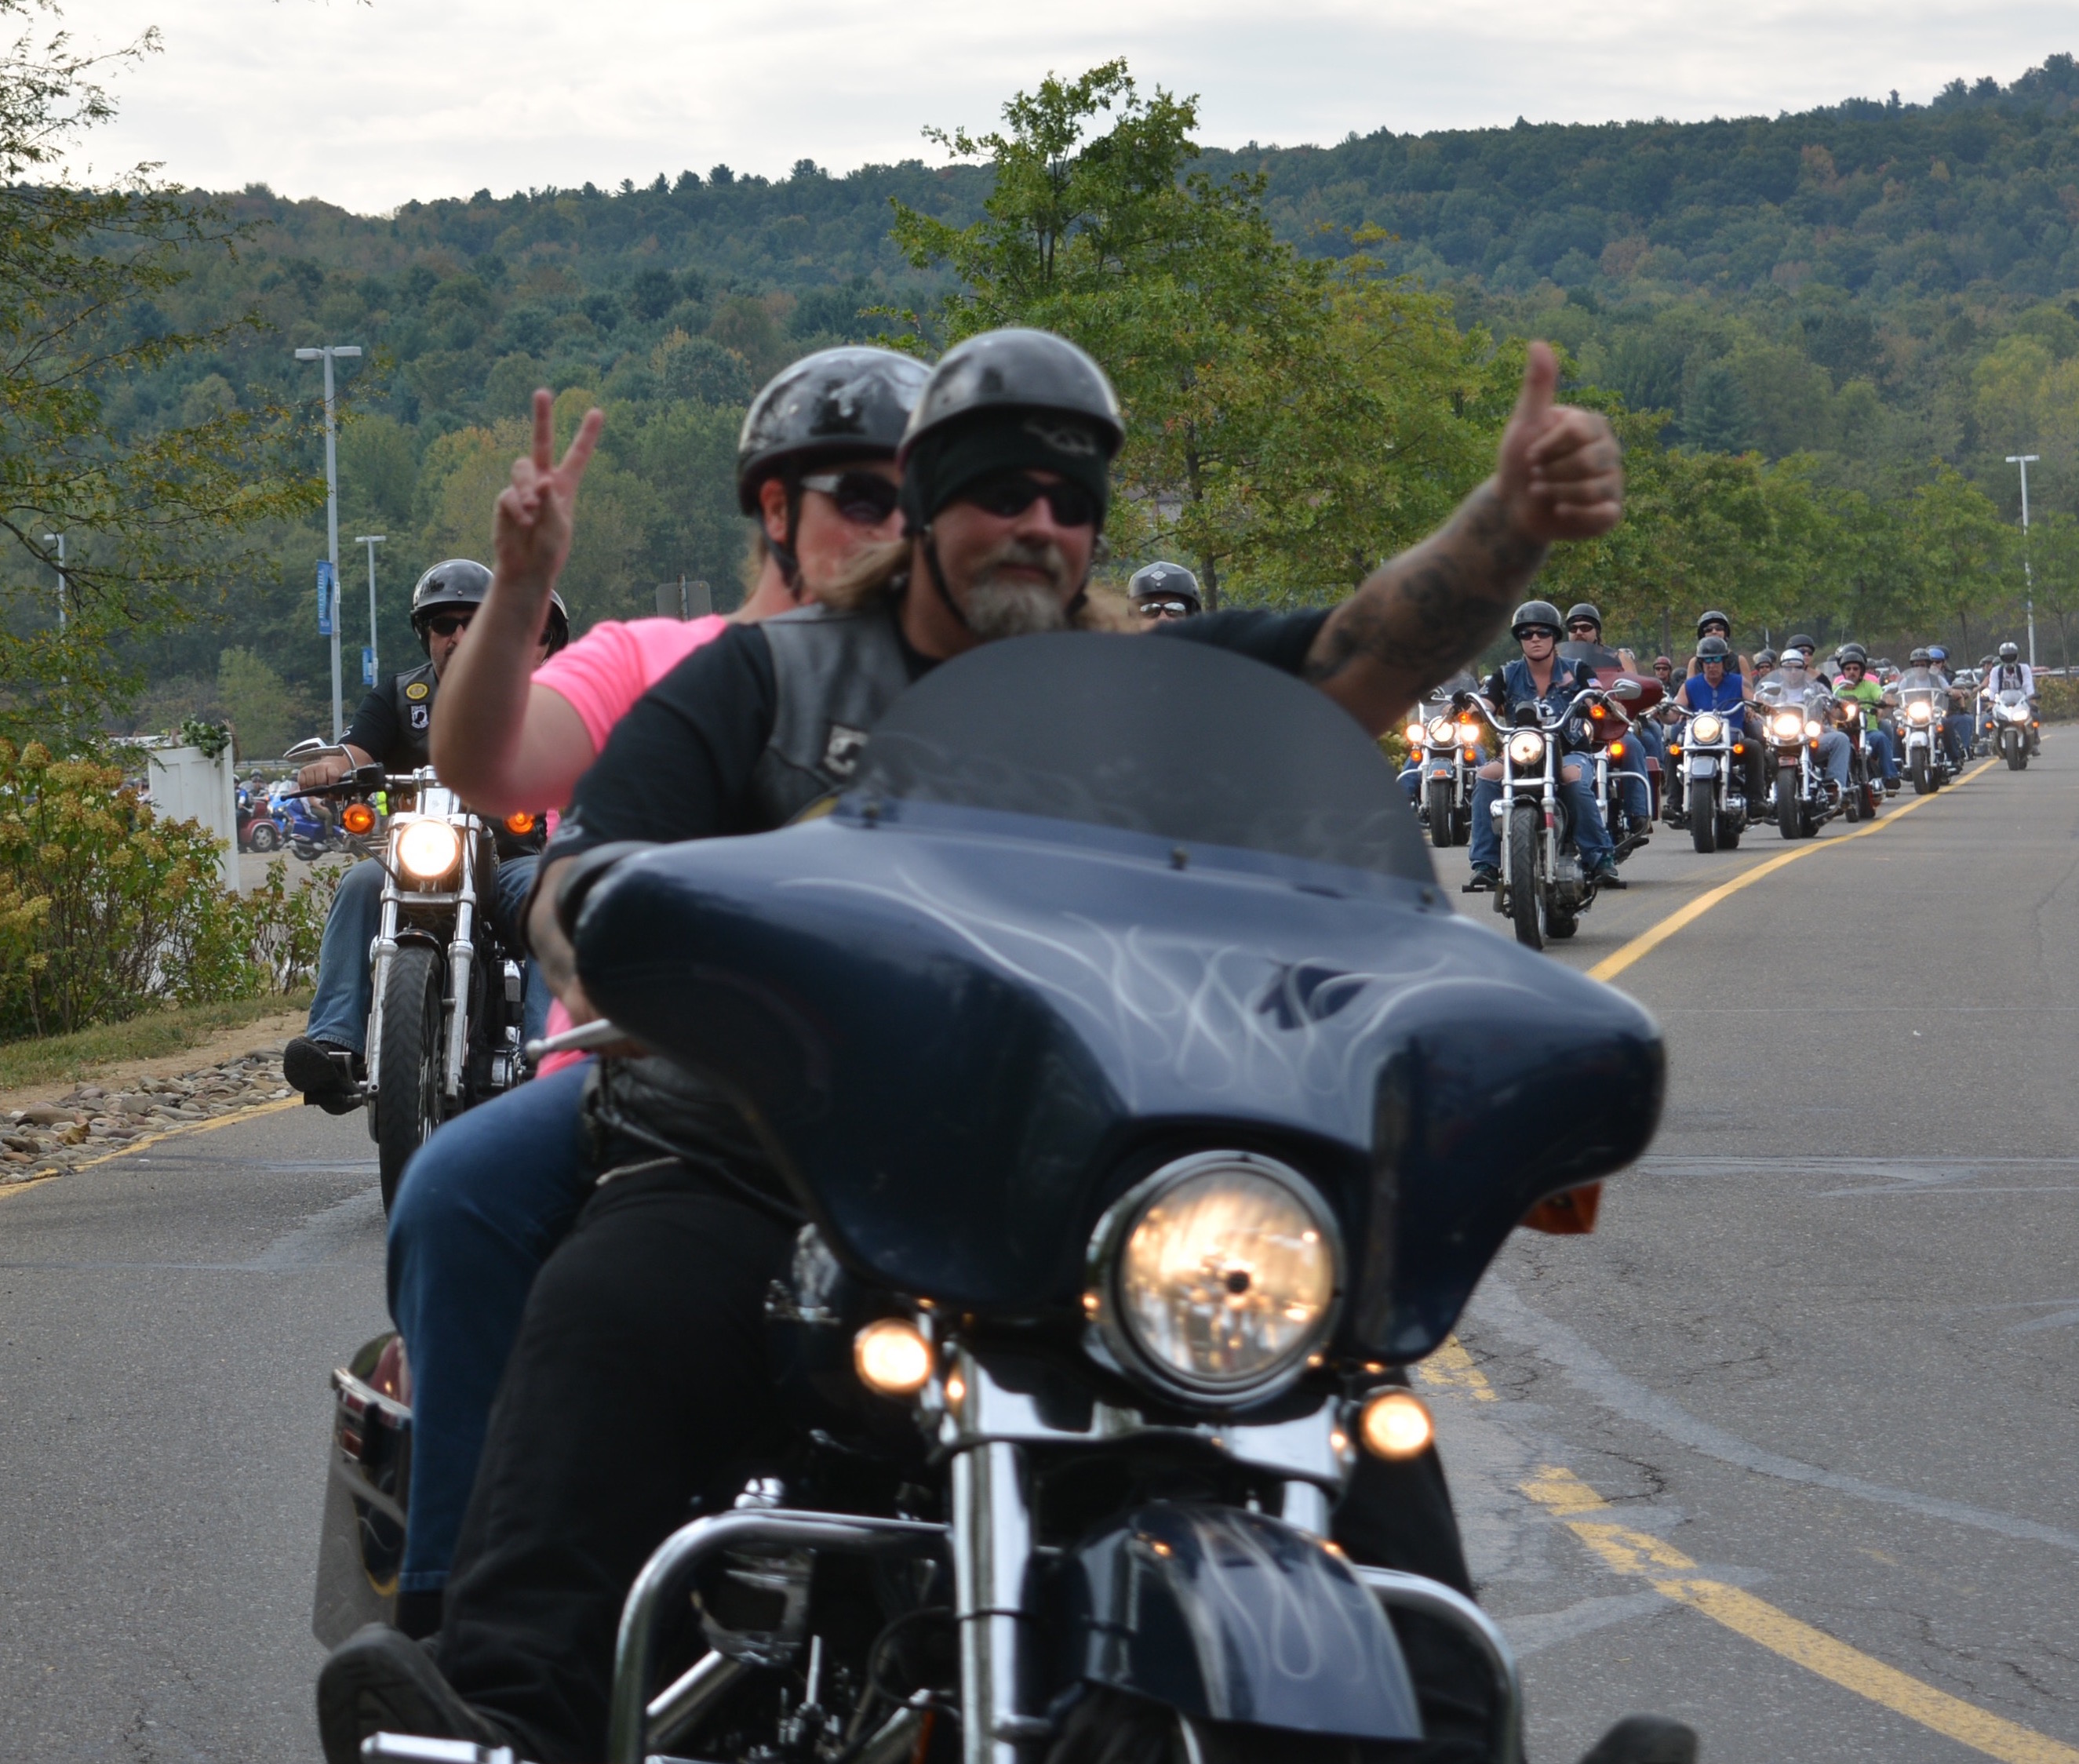 Annie’s ride raises funds for a good cause